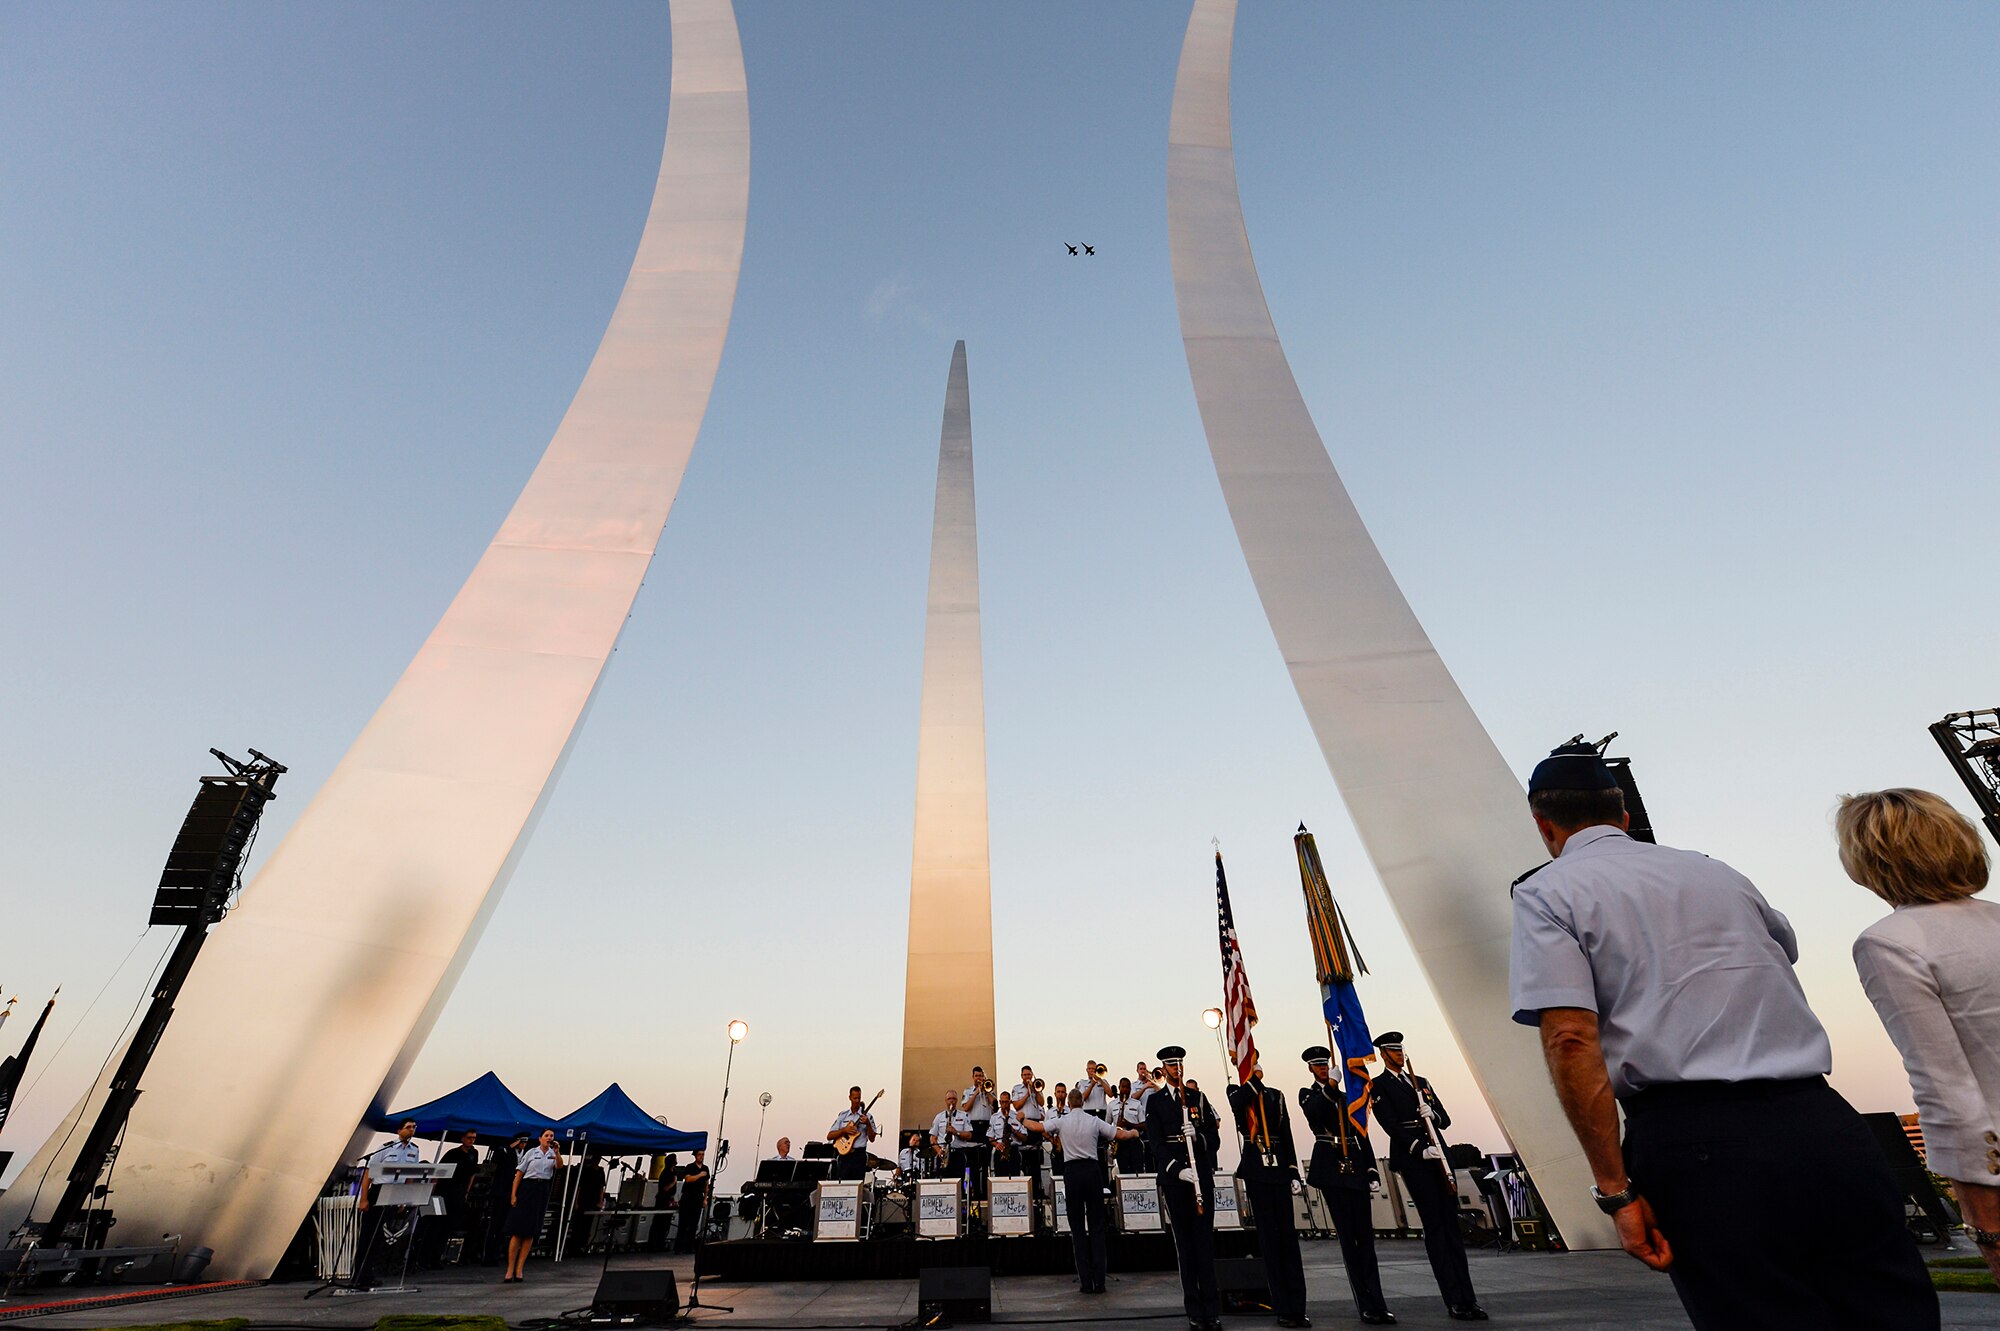 A T-38 Talon formation flyover kicks off a public U.S. Air Force Band concert at the Air Force Memorial to honor Vietnam War veterans Aug. 26, 2016, in Arlington, Va. Prior to attending the concert, Air Force Undersecretary Lisa S. Disbrow and Chief of Staff Gen. Dave Goldfein welcomed Gen. Stephen W. Wilson as the service's new vice chief of staff at a reception in the Fort Myer Officer's Club. (U.S. Air Force photo/Tech. Sgt. Joshua L. DeMotts)